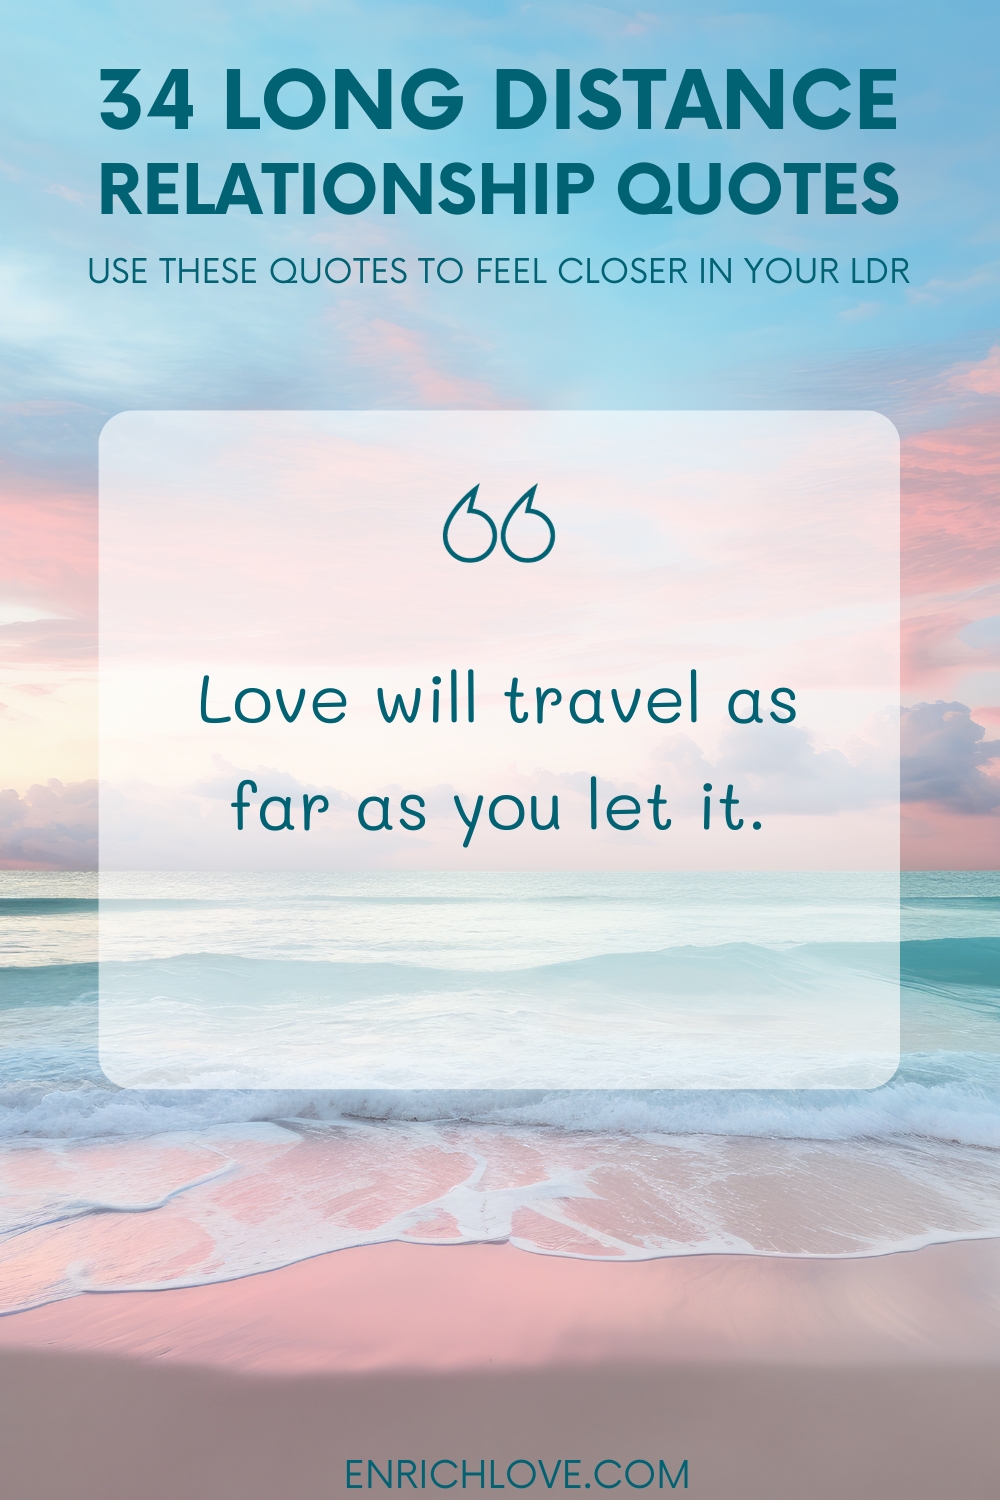 34 Long Distance Relationship Quotes - Love will travel as far as you let it.